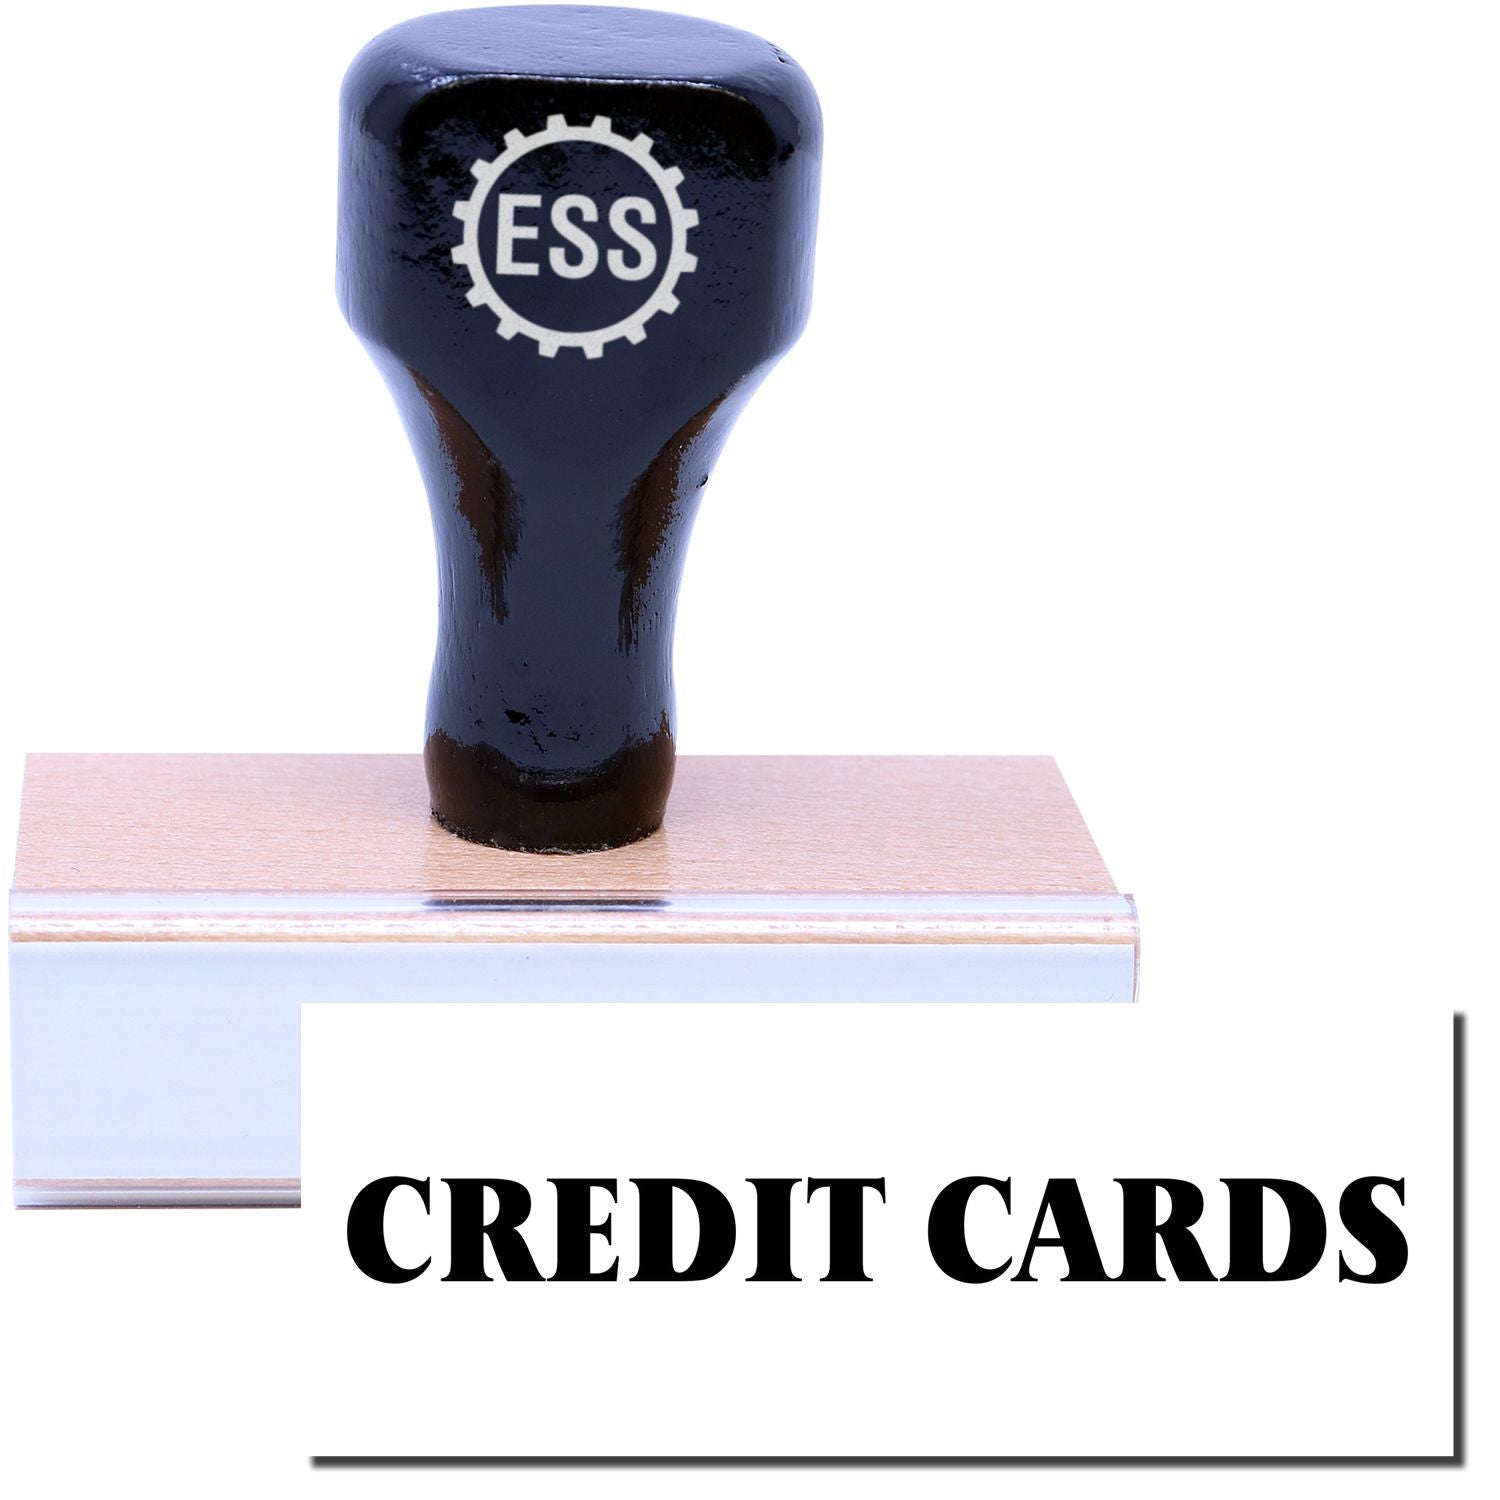 A stock office rubber stamp with a stamped image showing how the text "CREDIT CARDS" is displayed after stamping.